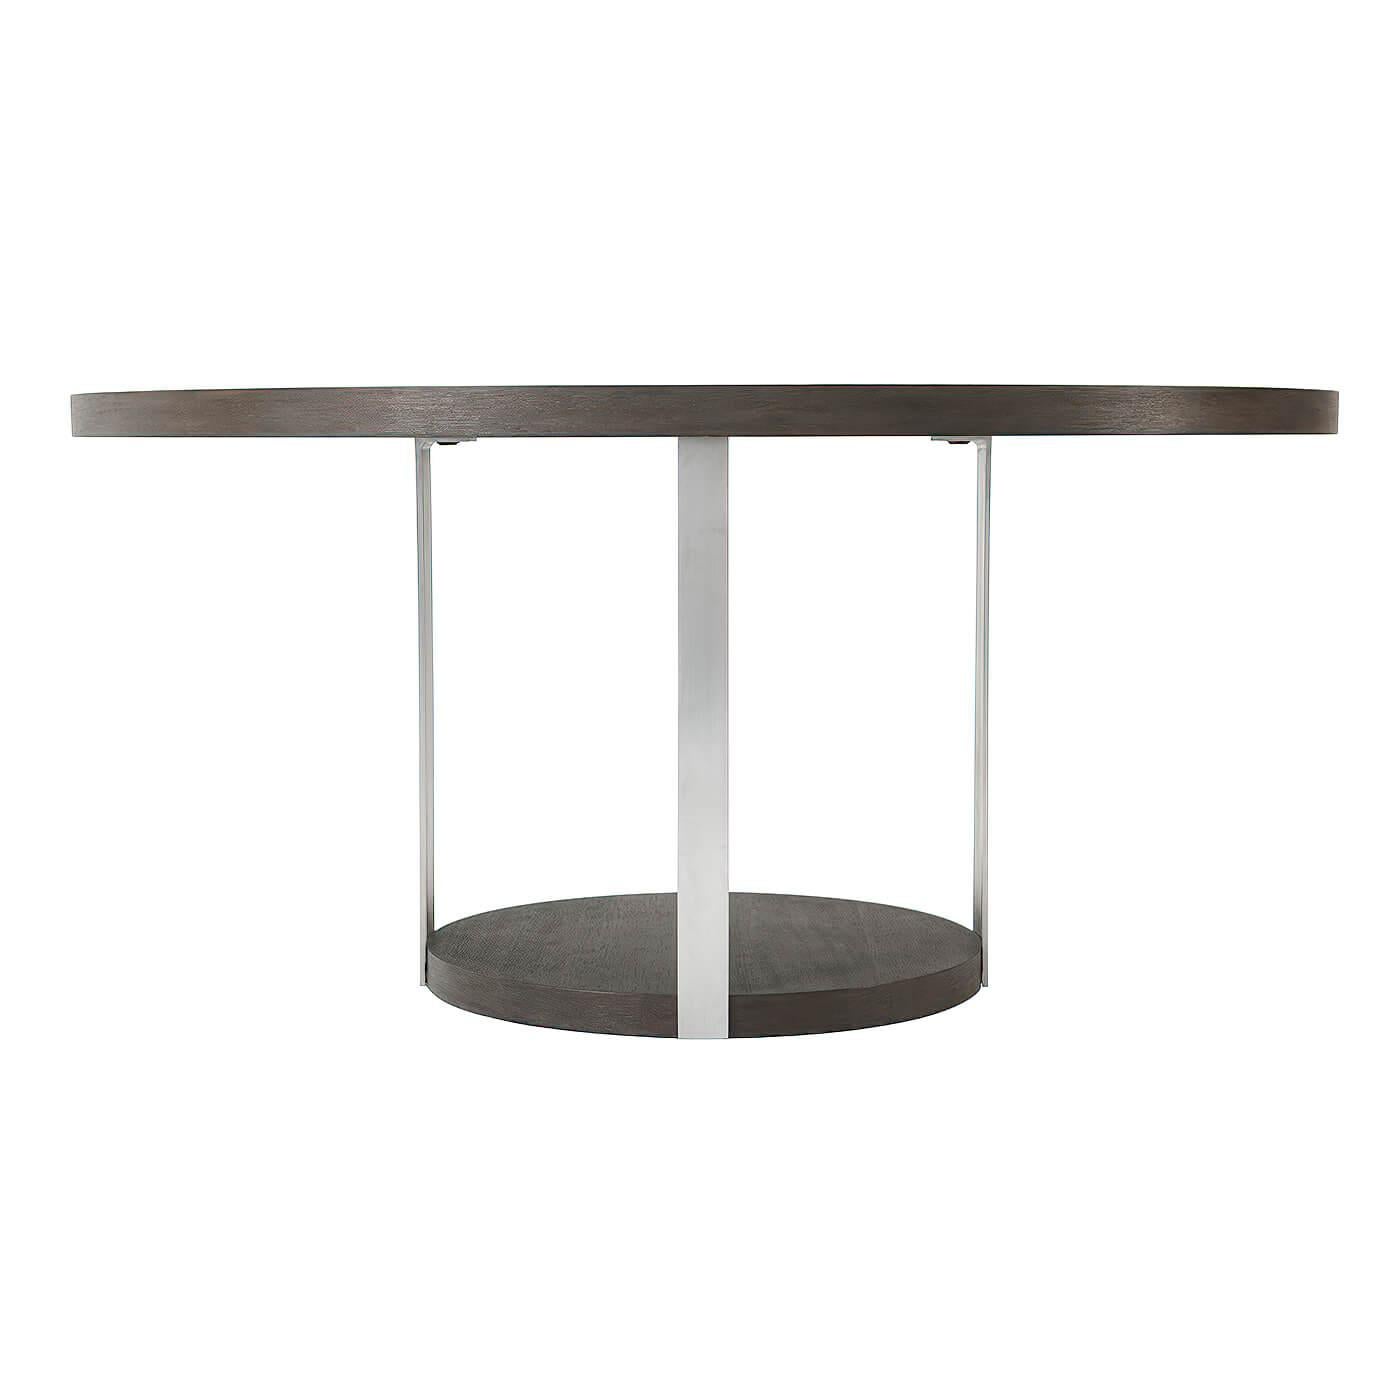 Modern circular Anise finish dining table with four brushed nickel finish supports on a matching round platform base.

Dimensions: 62.25